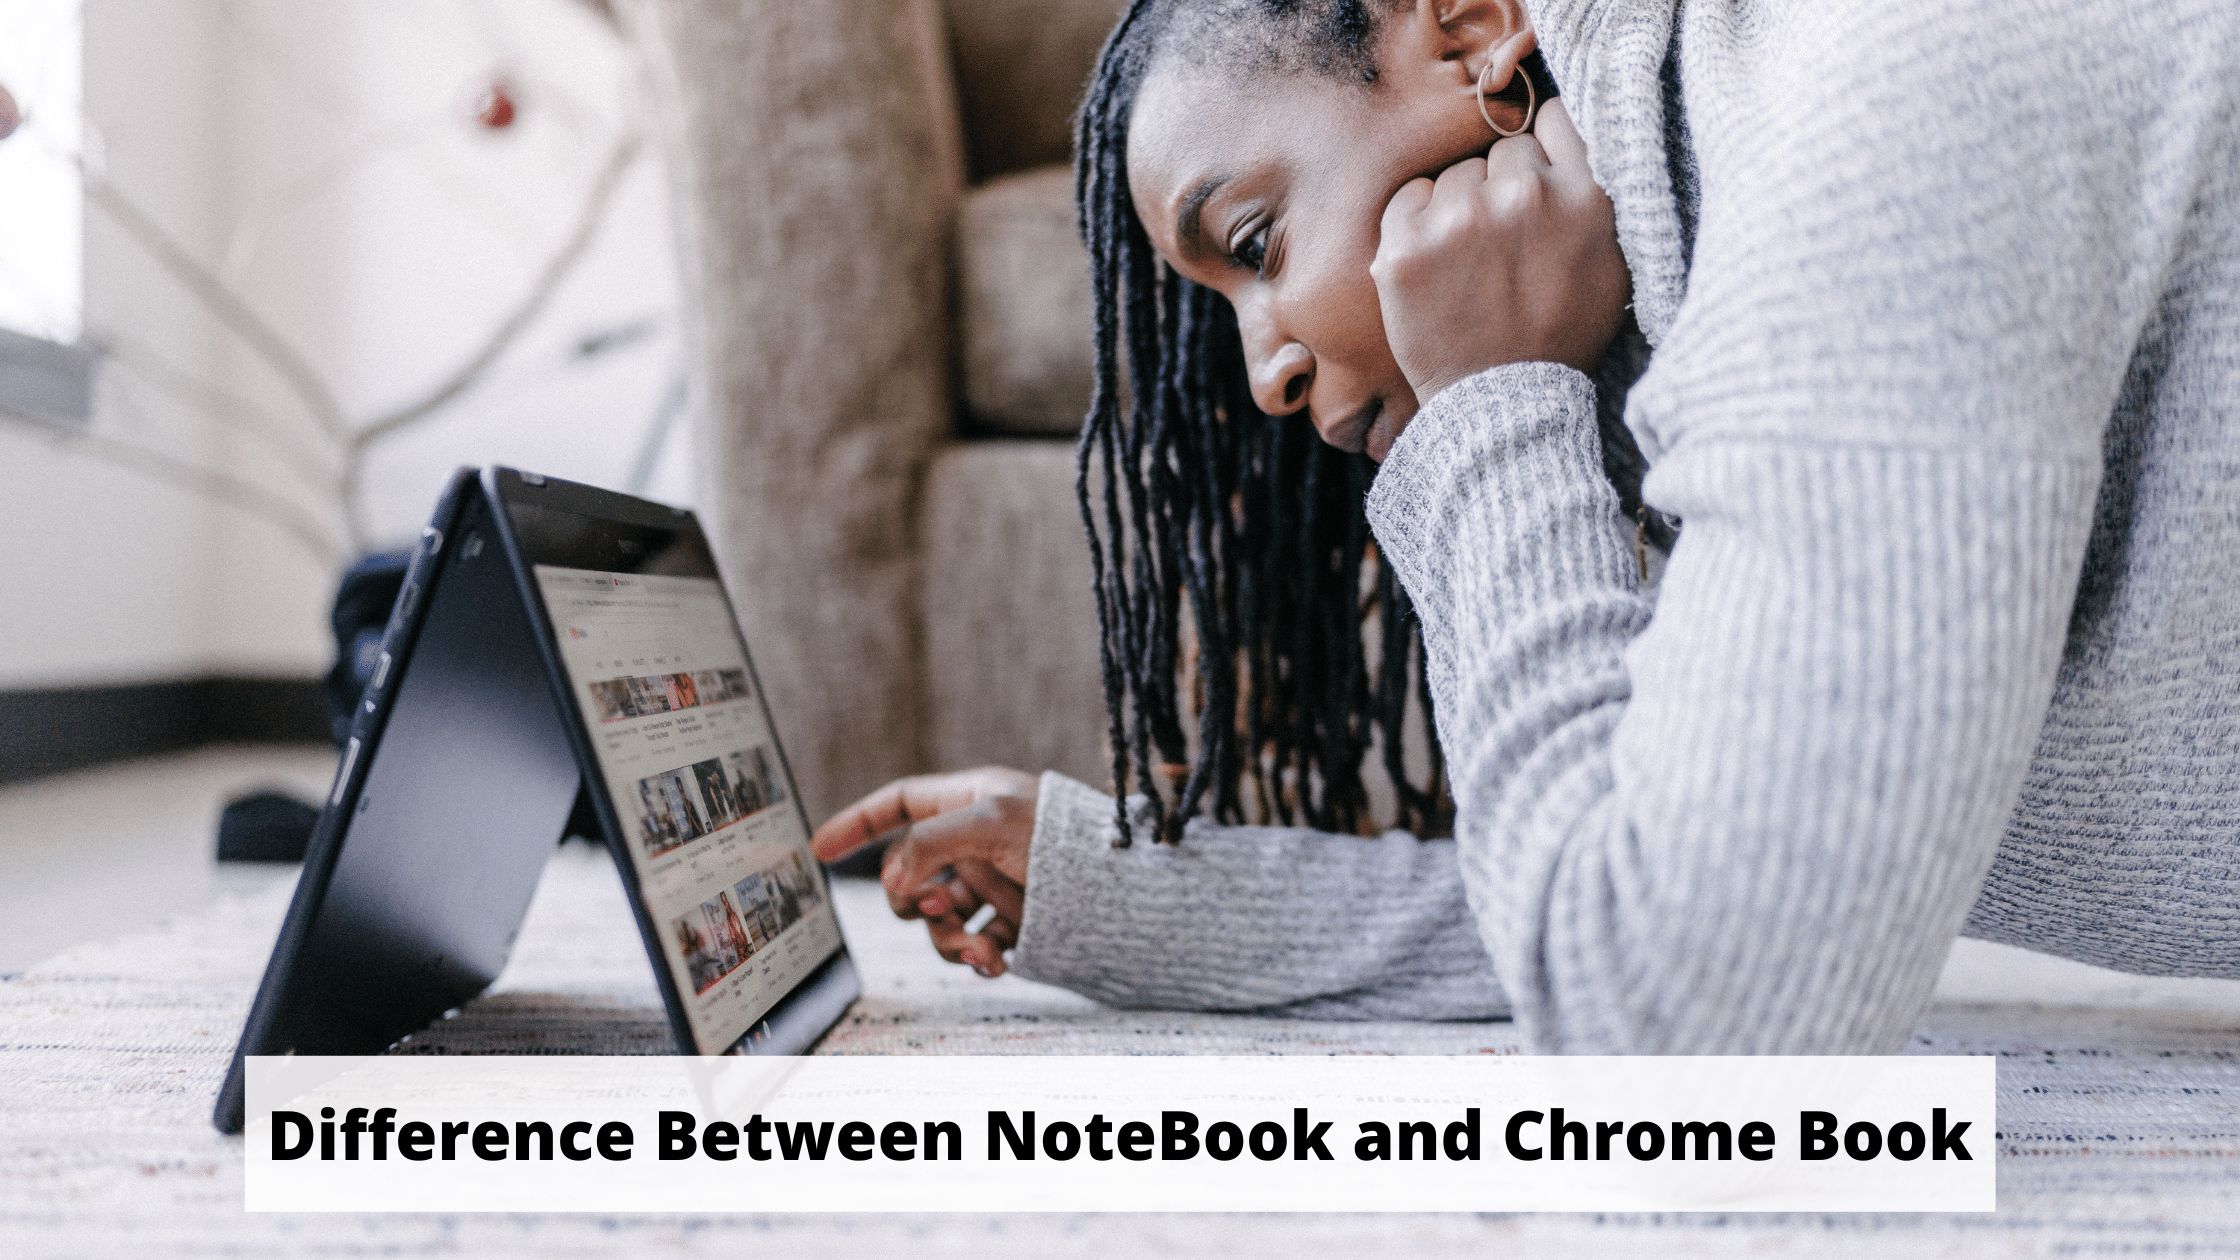 Difference Between NoteBook and Chrome Book